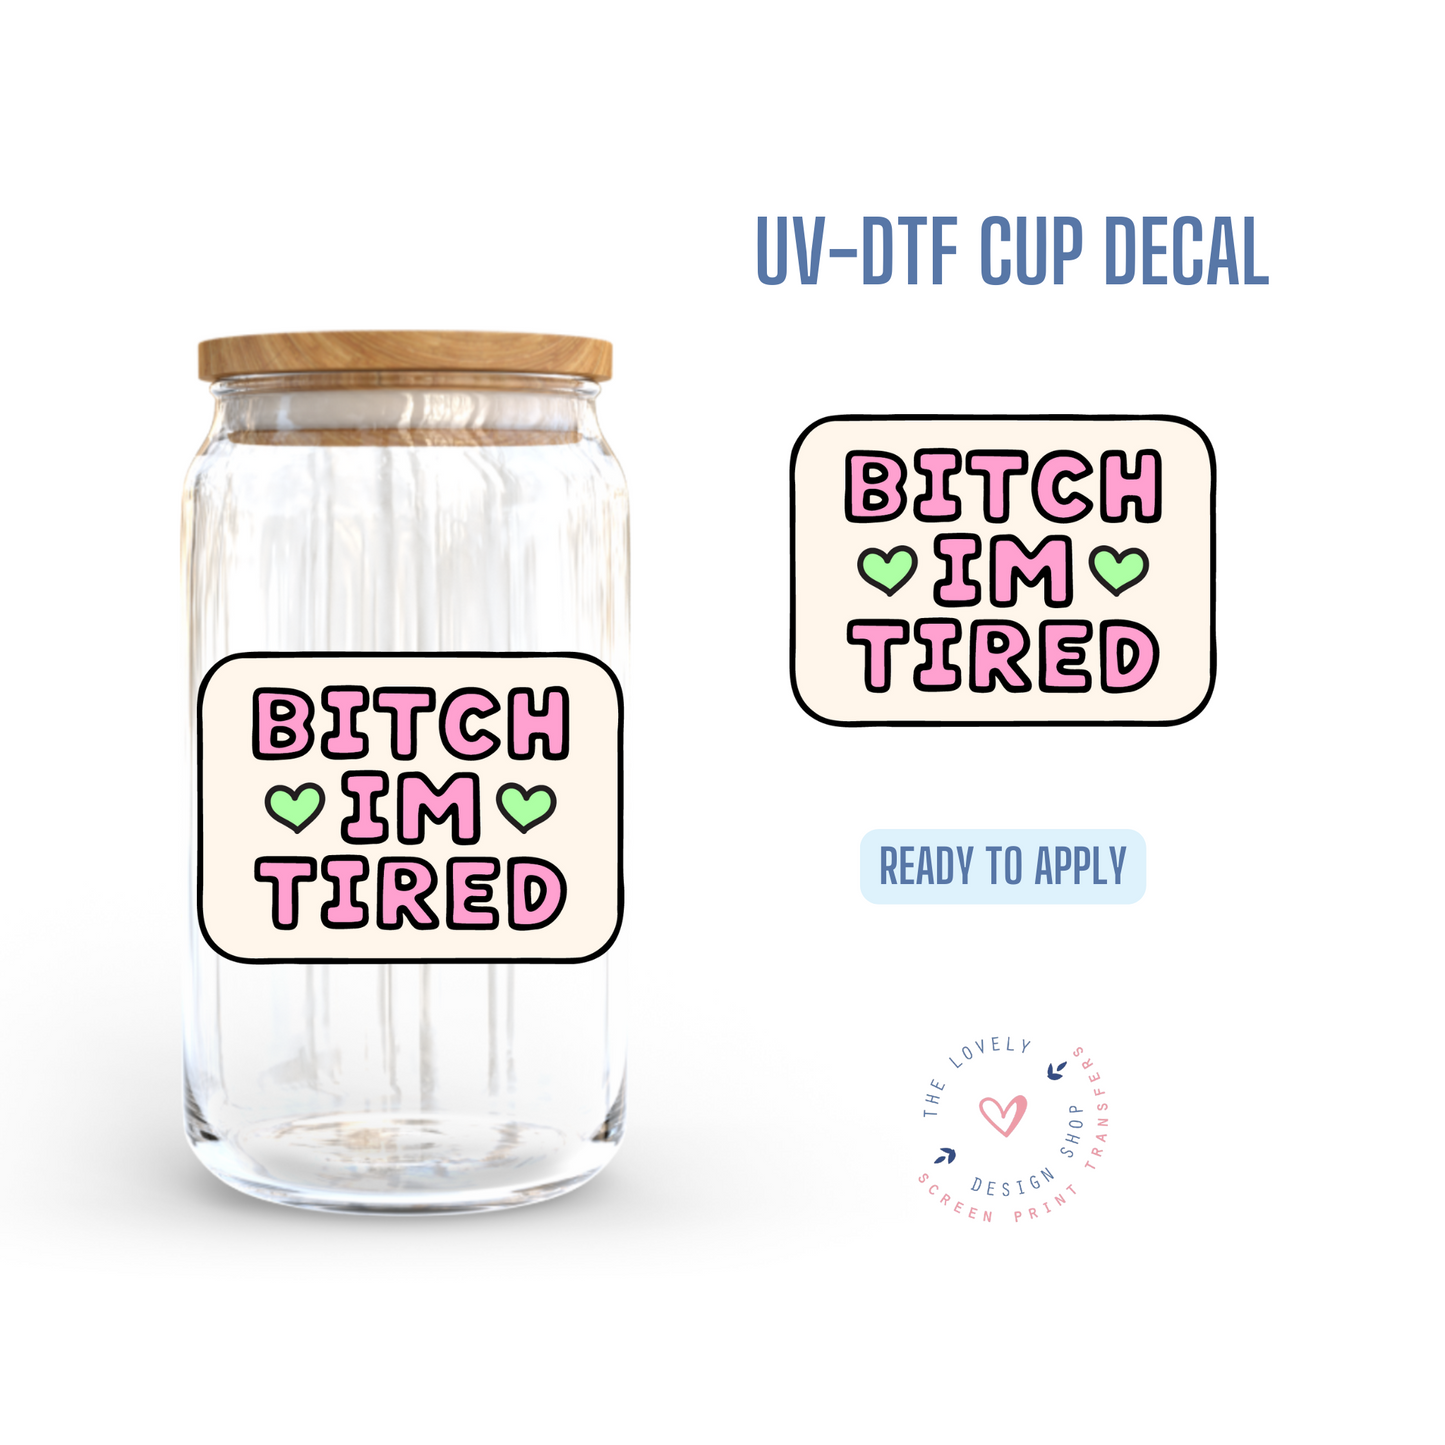 Bitch I'm Tired - UV DTF Cup Decal (Ready to Ship) Apr 17